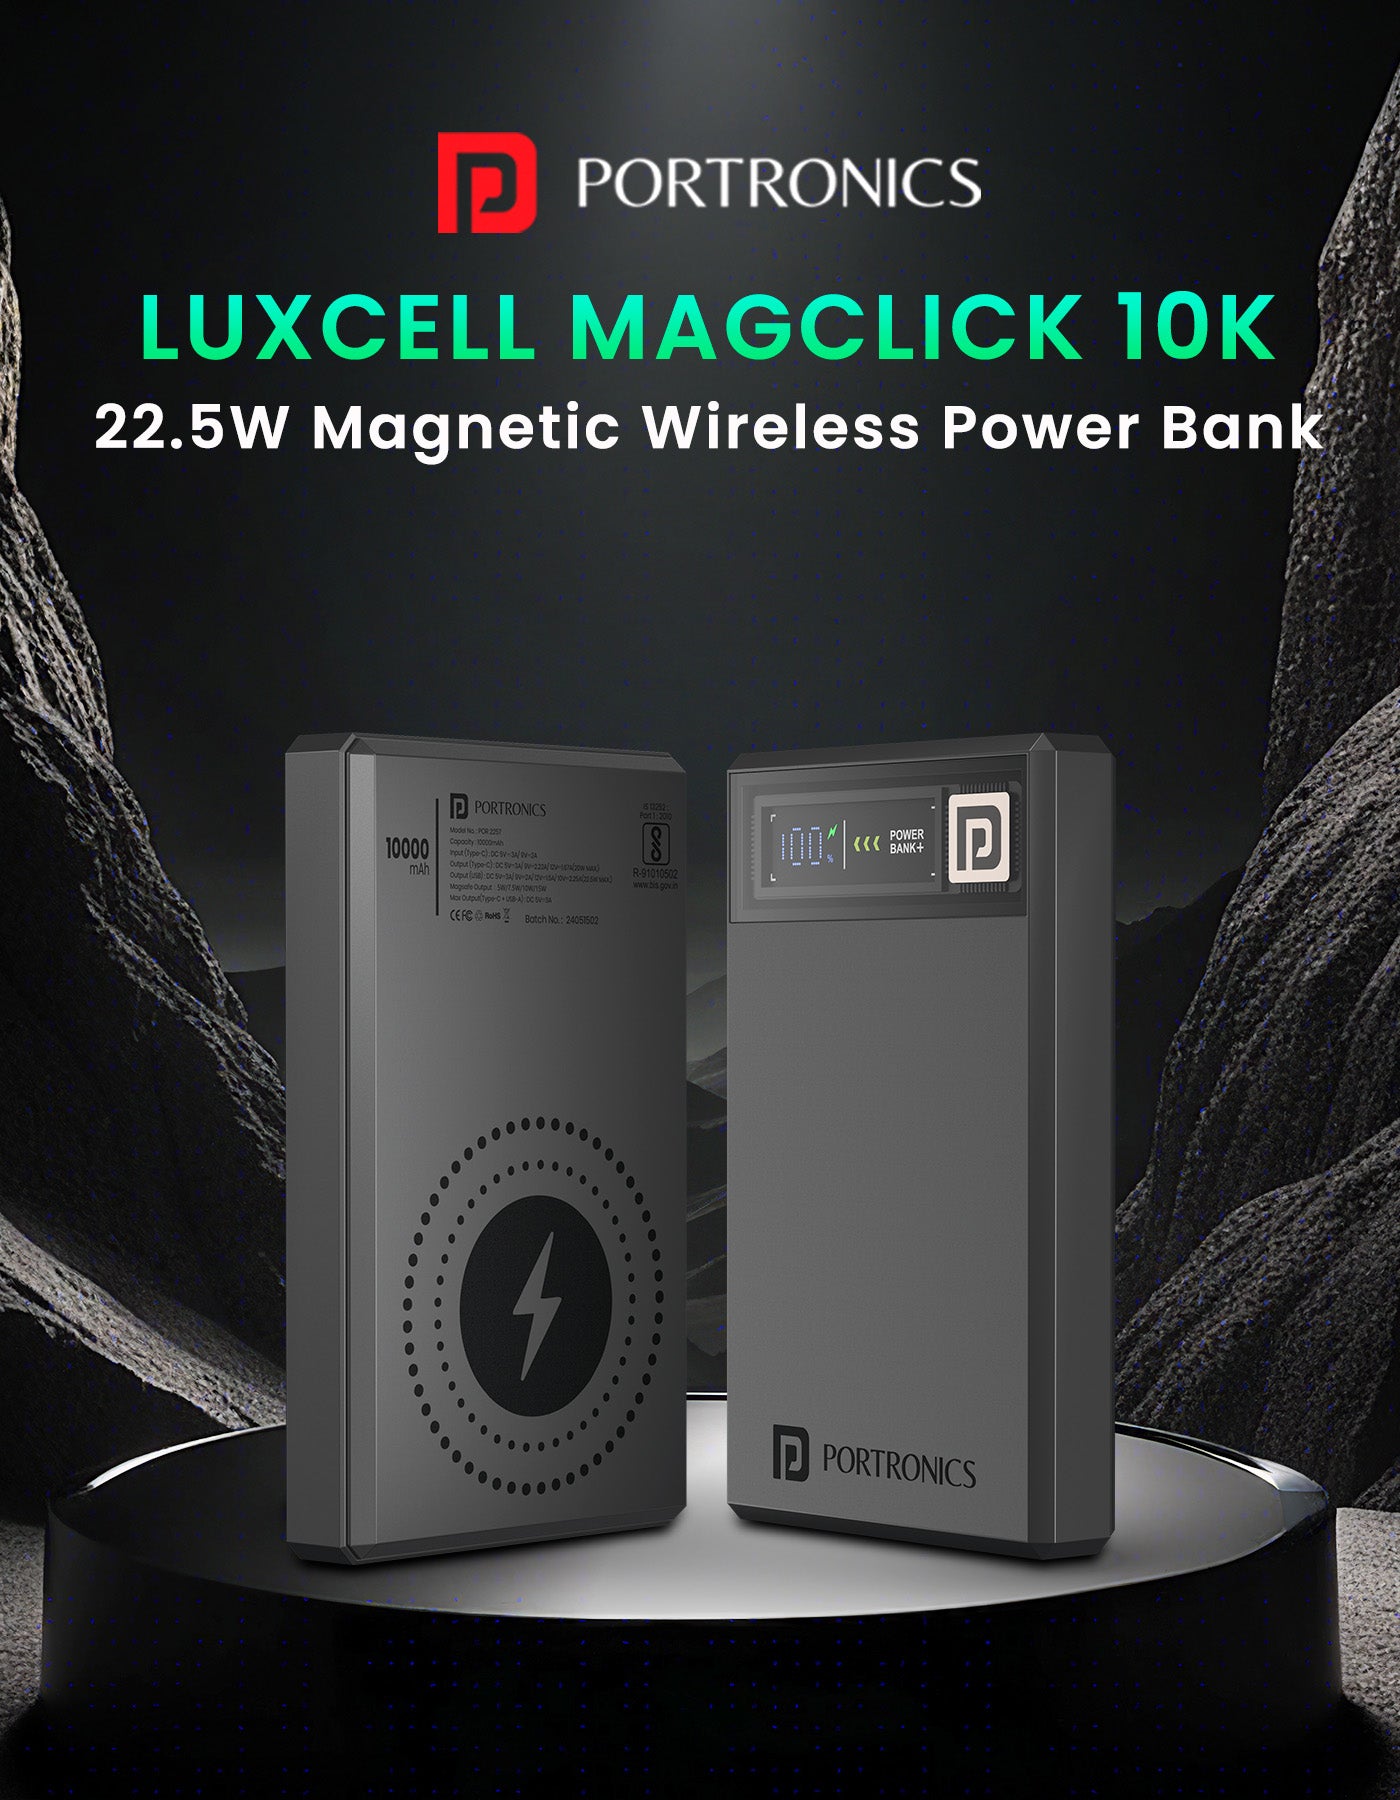 Portronics Luxcell MagClick 10K 10000mah 15w mag safe fast charging wireless power bank with 22.5w wired charging